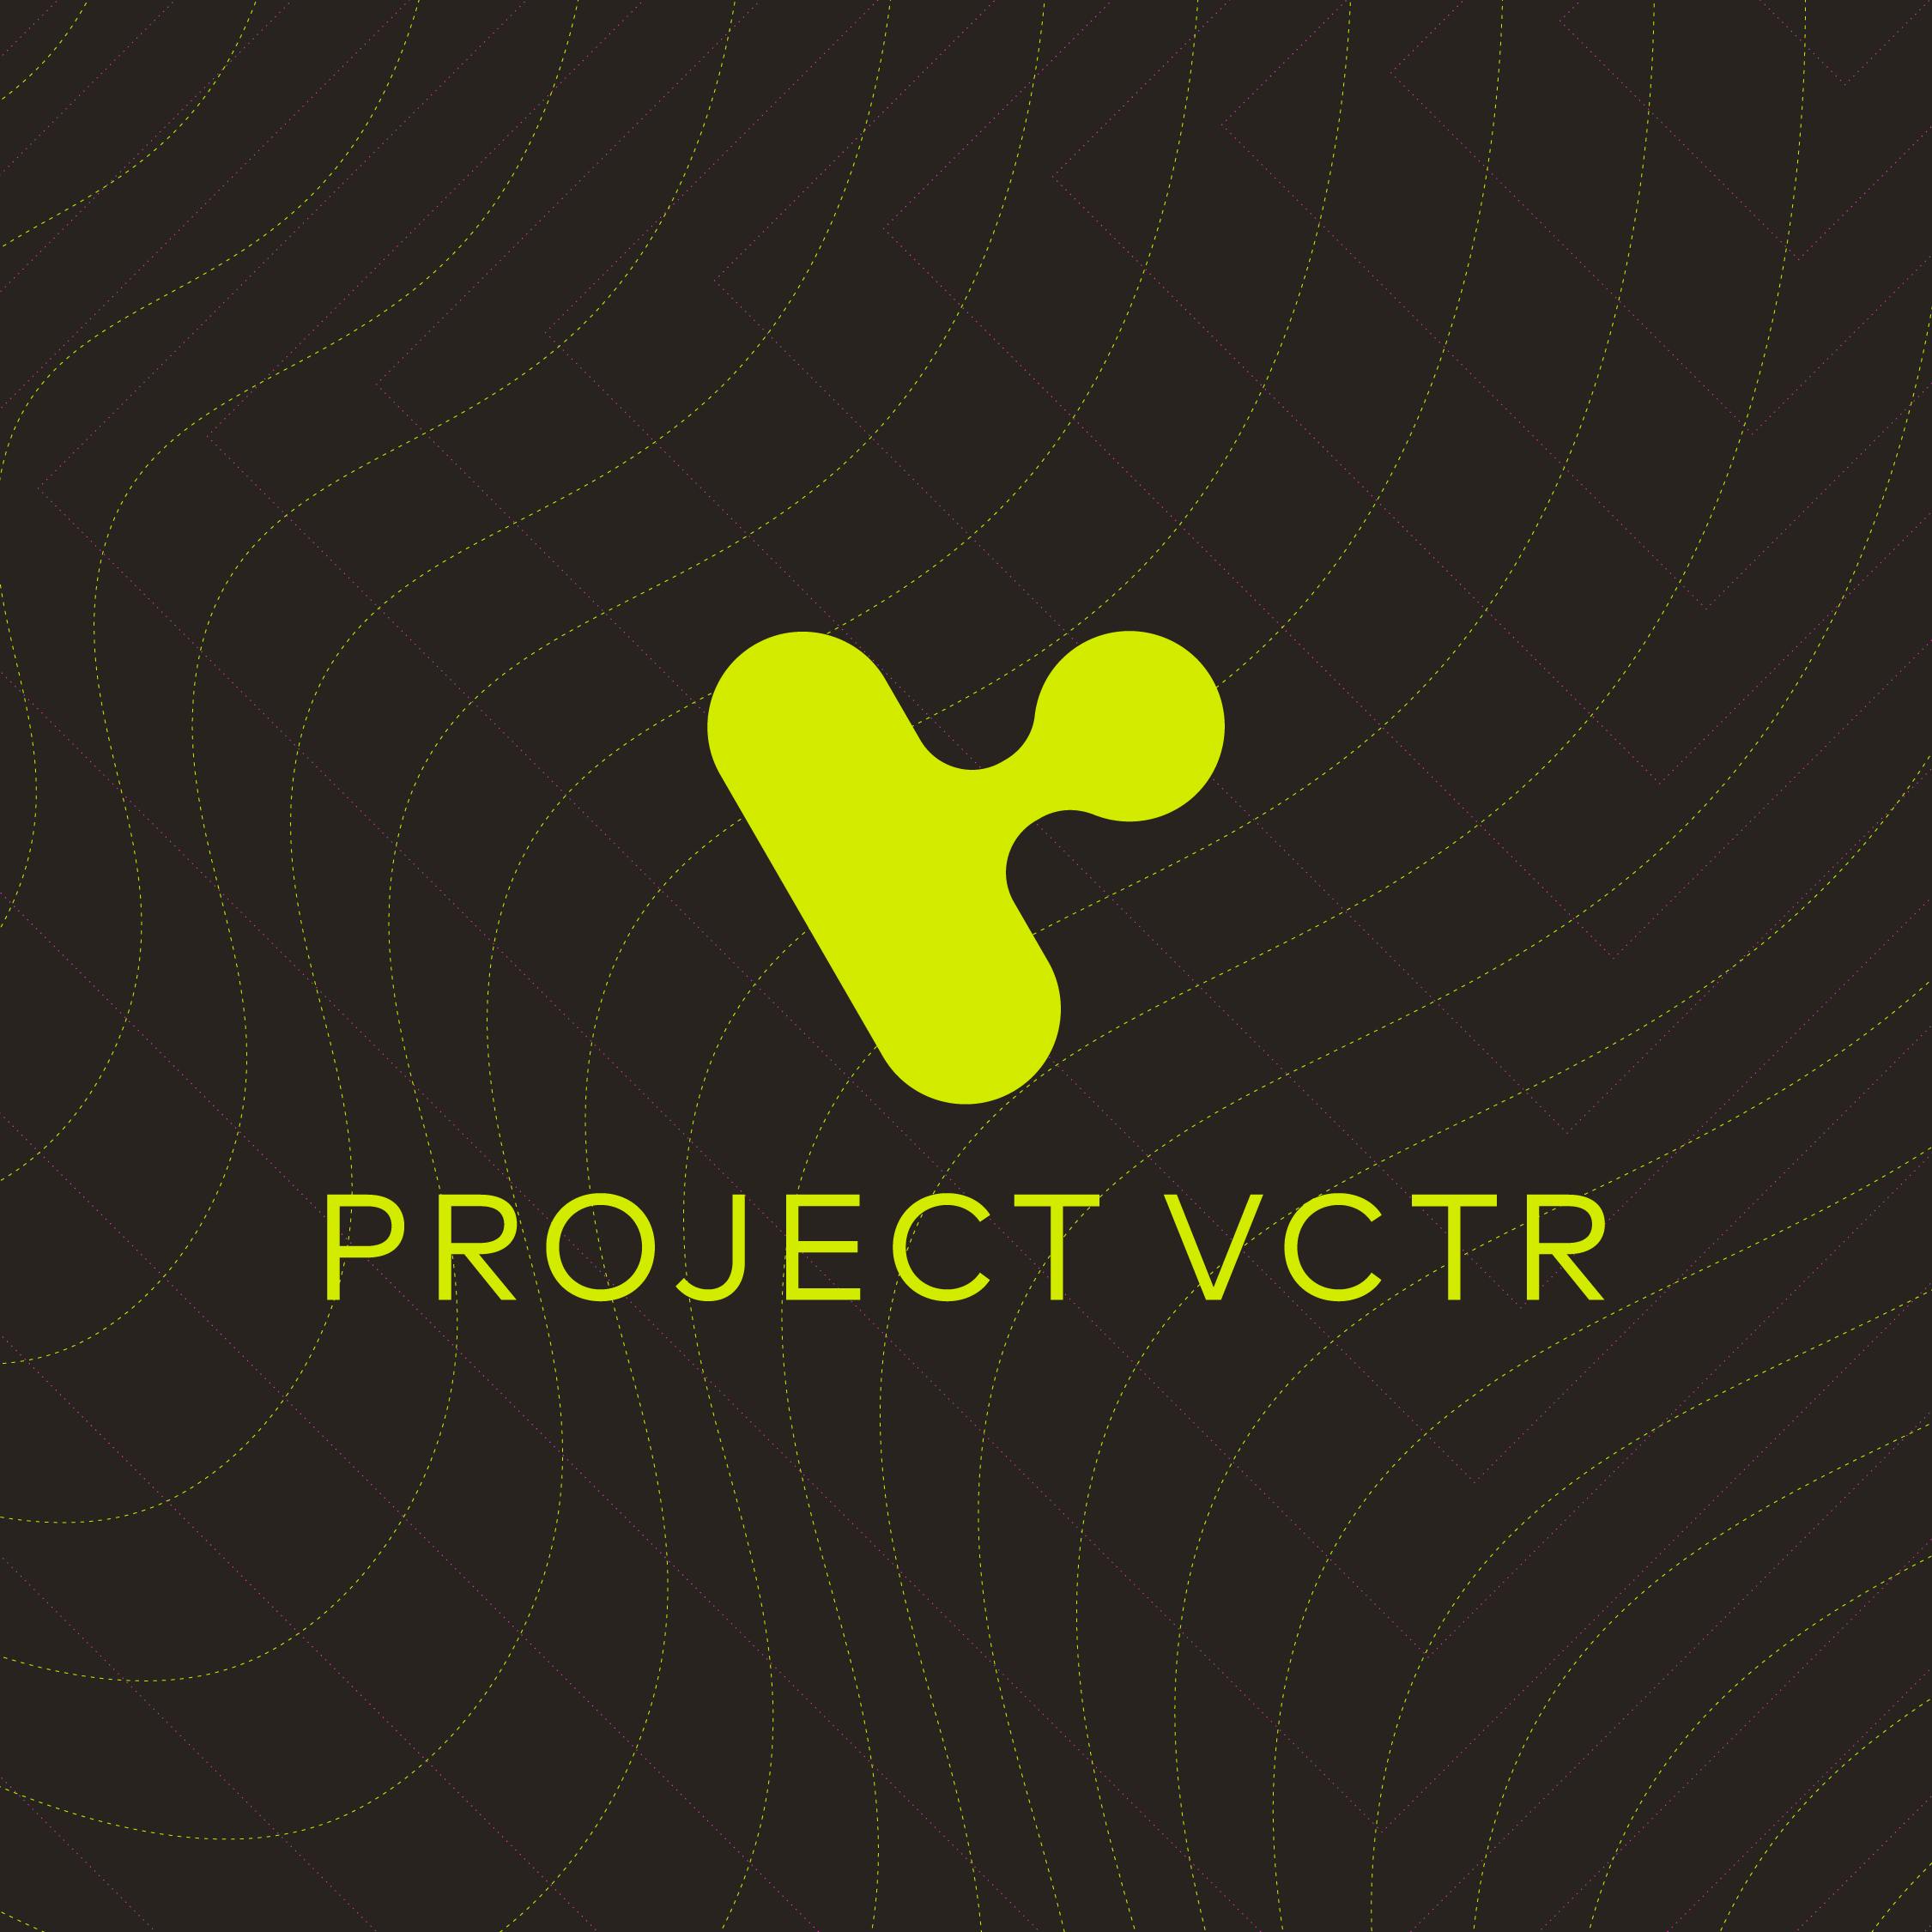 Project VCTR logo